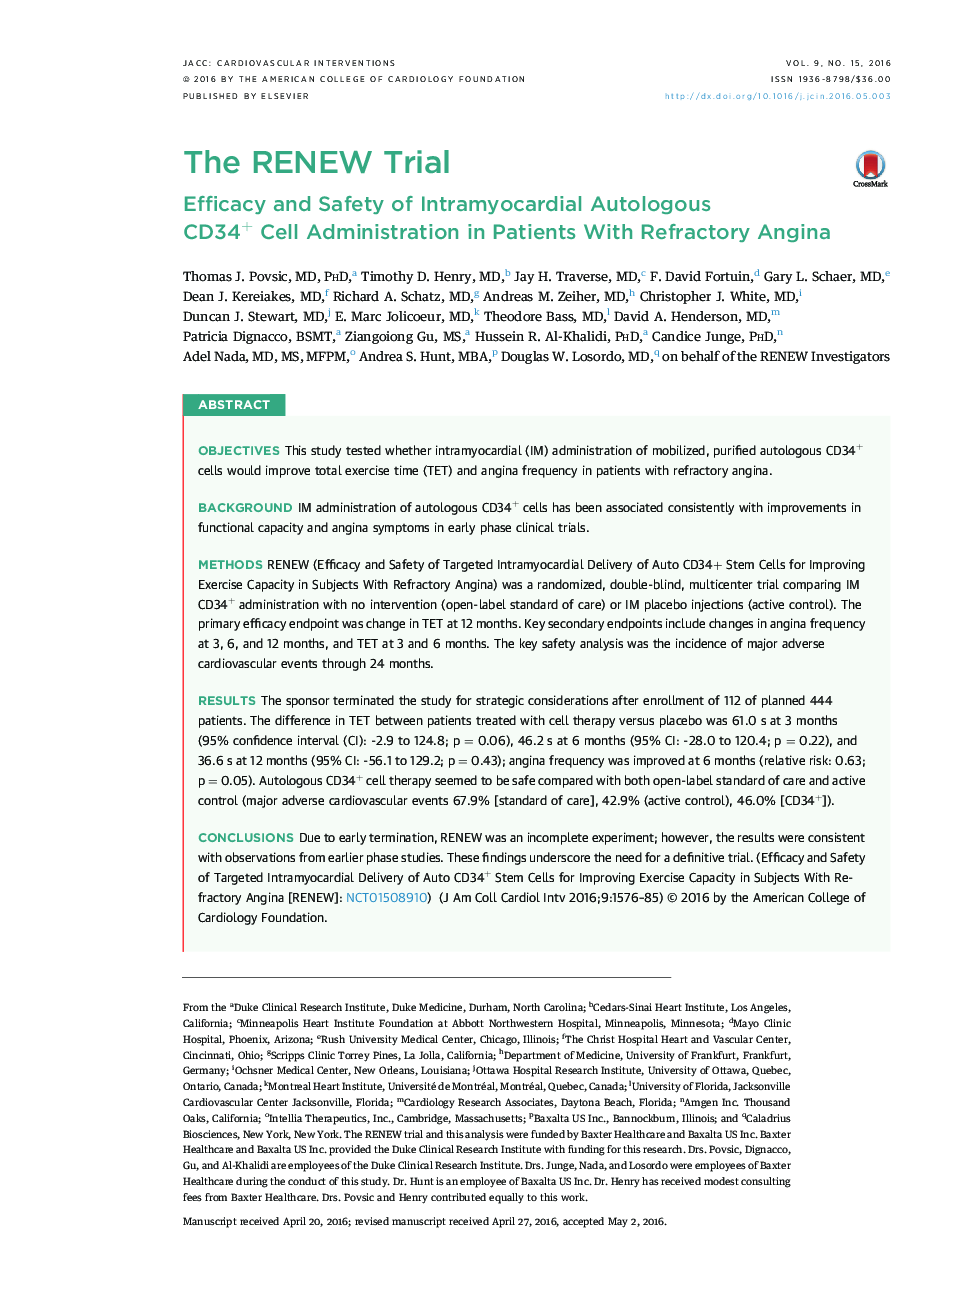 The RENEW Trial : Efficacy and Safety of Intramyocardial Autologous CD34+ Cell Administration in Patients With Refractory Angina